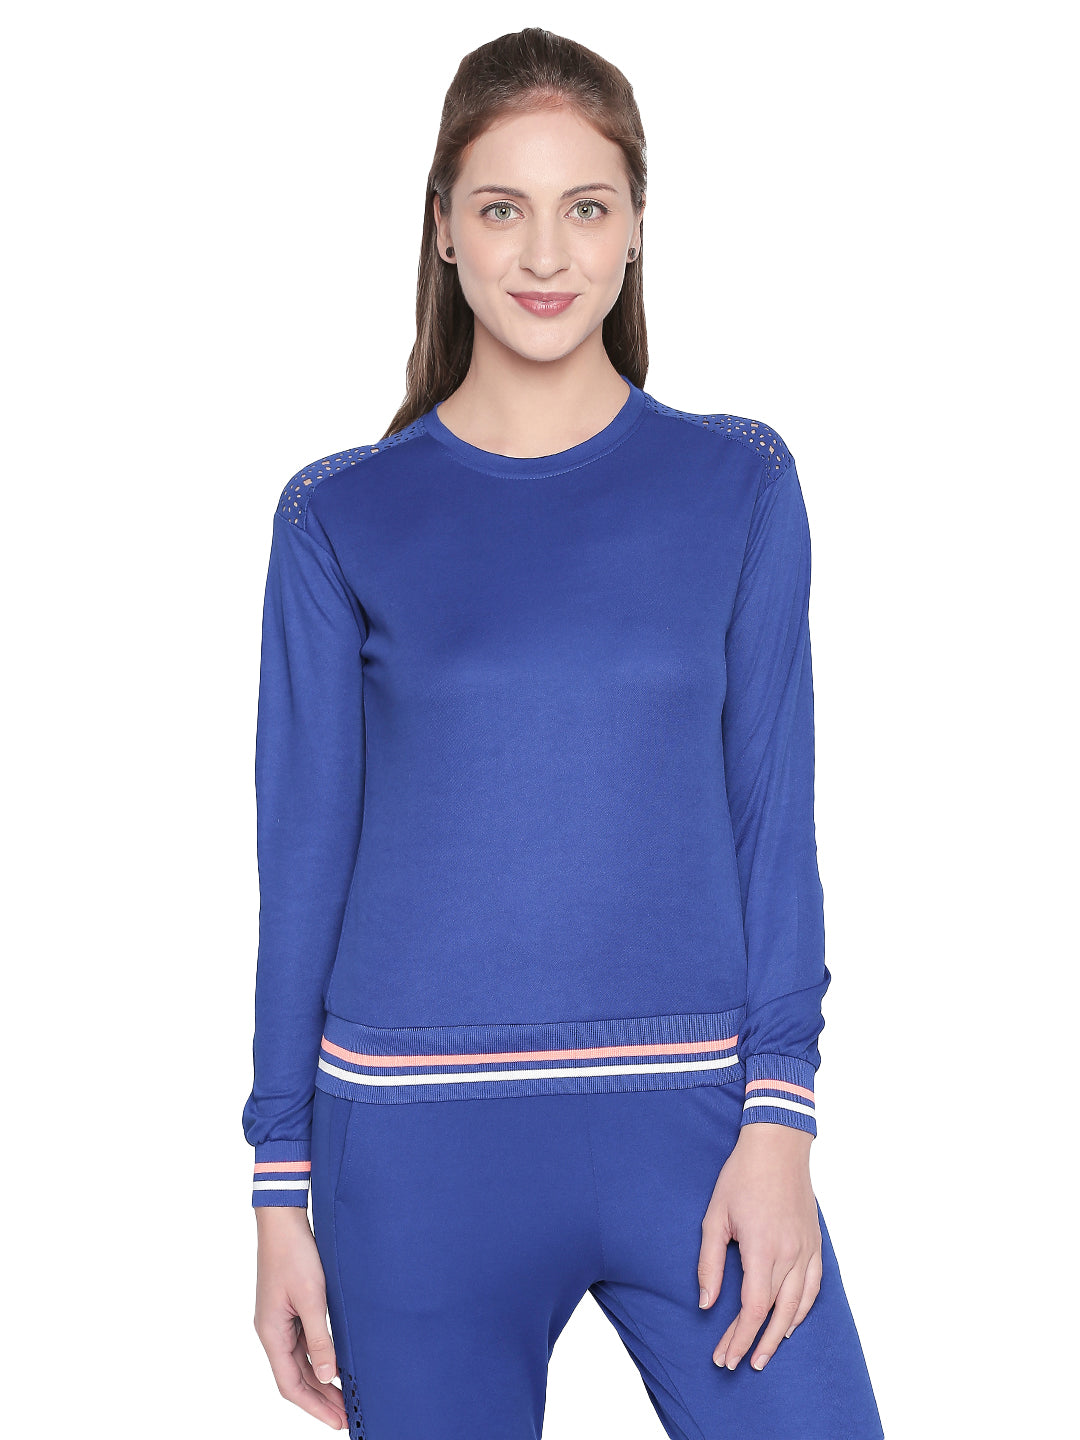 Royal Blue Color Regular fit Round Neck Full Sleeve sweat Top